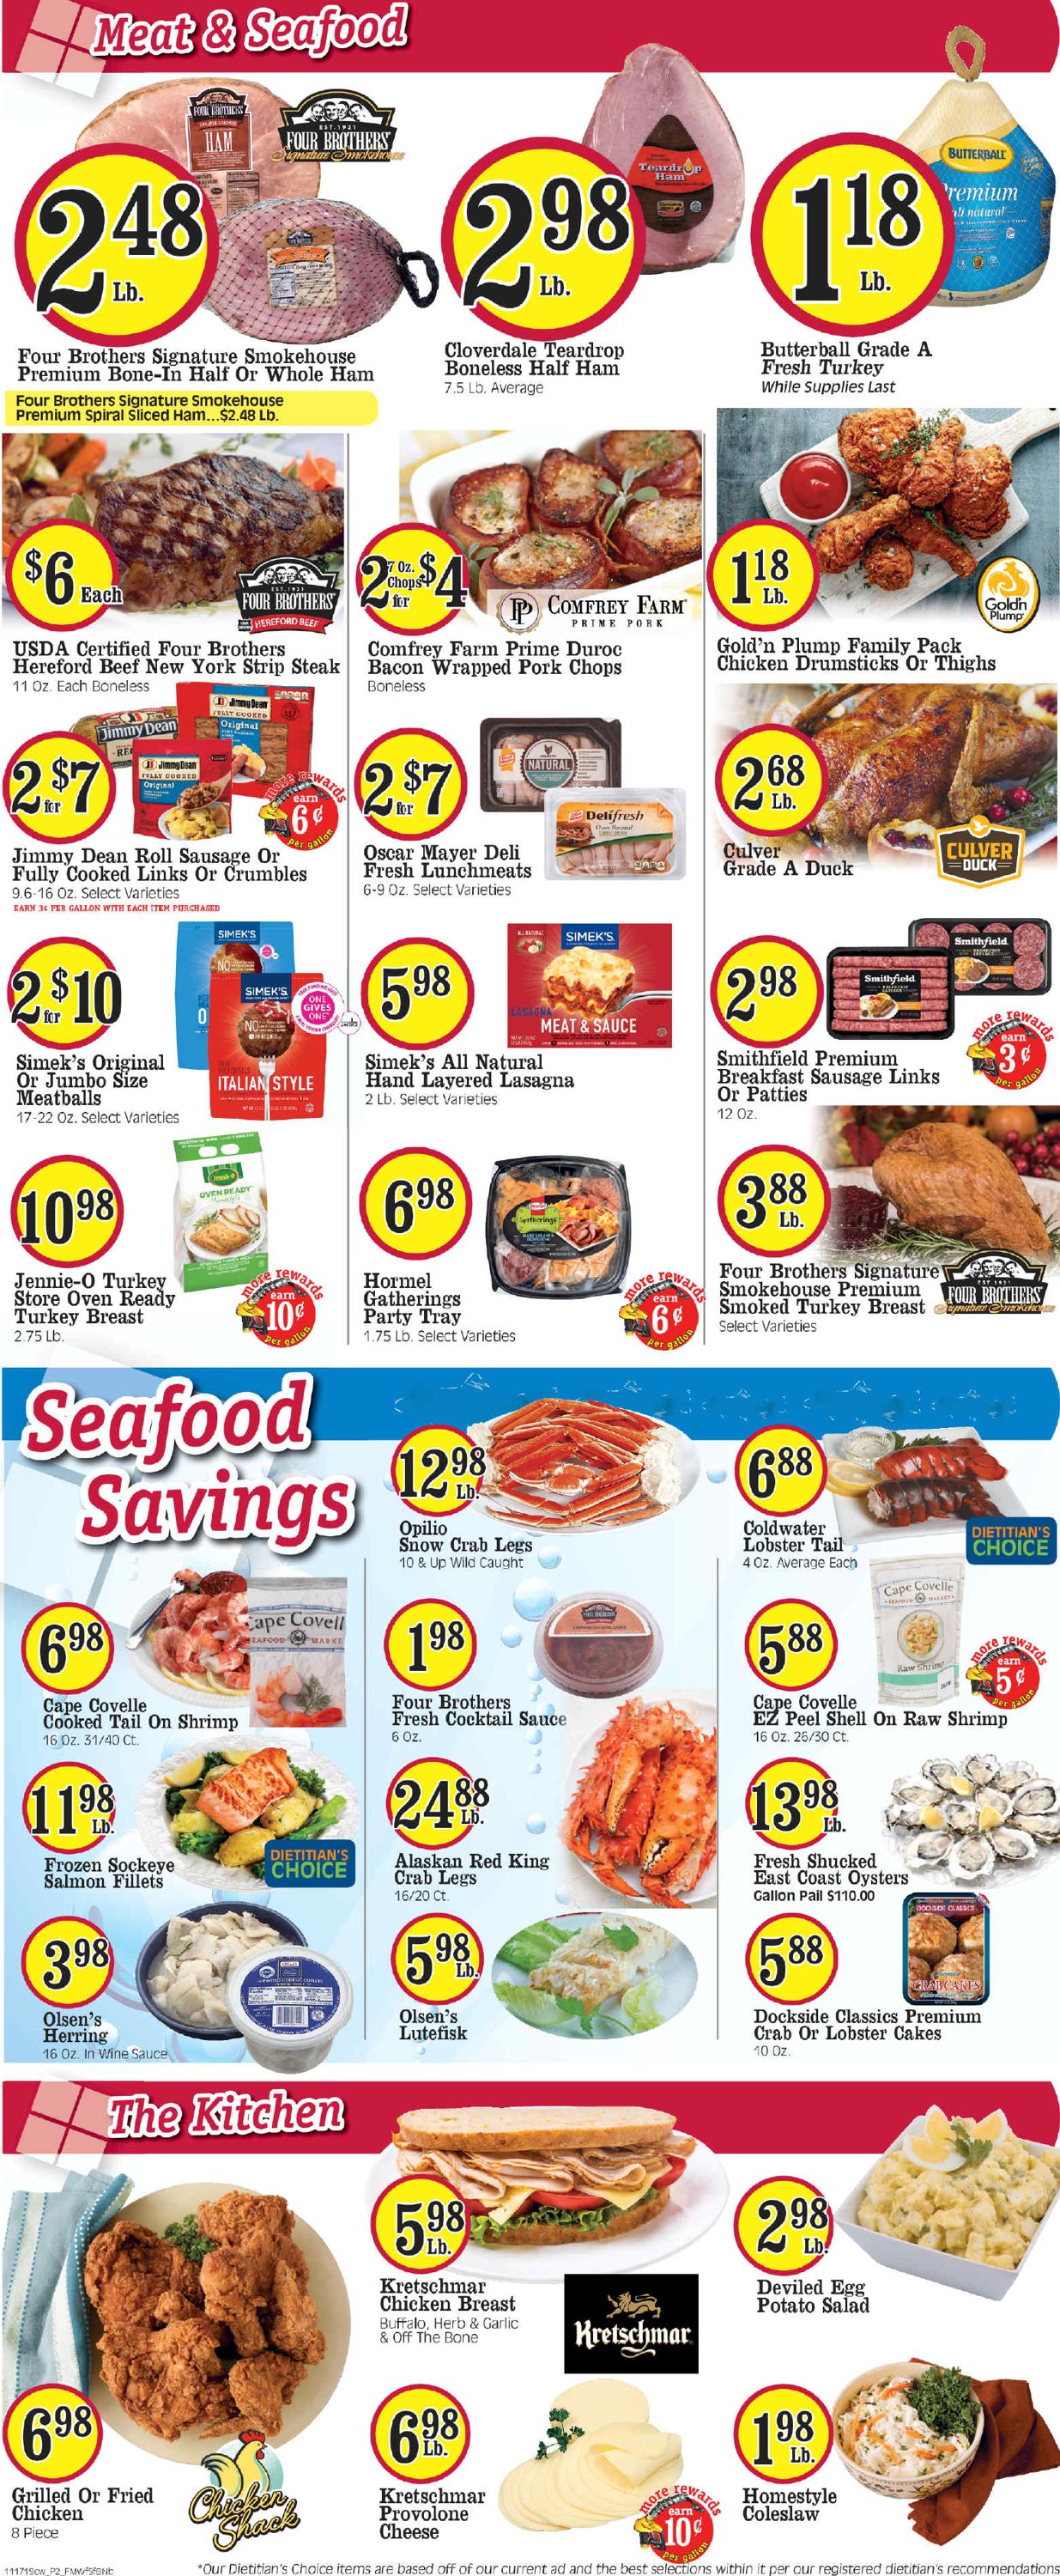 Cash Wise - Thanksgiving Ad 2019 Weekly Ad Circular - valid 11/20-11/26/2019 (Page 2)